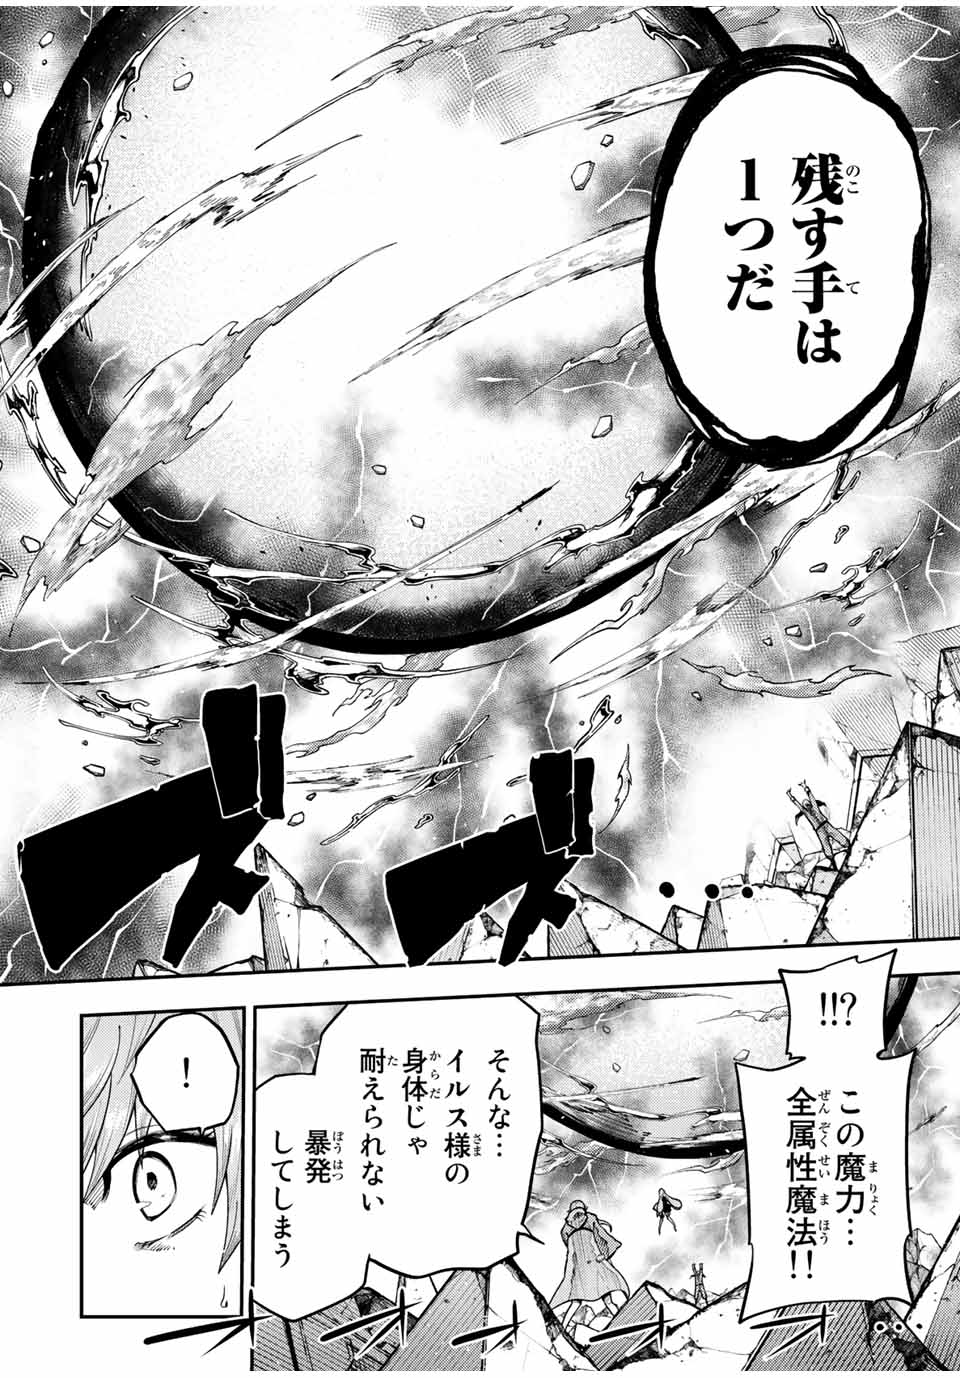 the strongest former prince-; 奴隷転生 ～その奴隷、最強の元王子につき～ 第114話 - Page 14